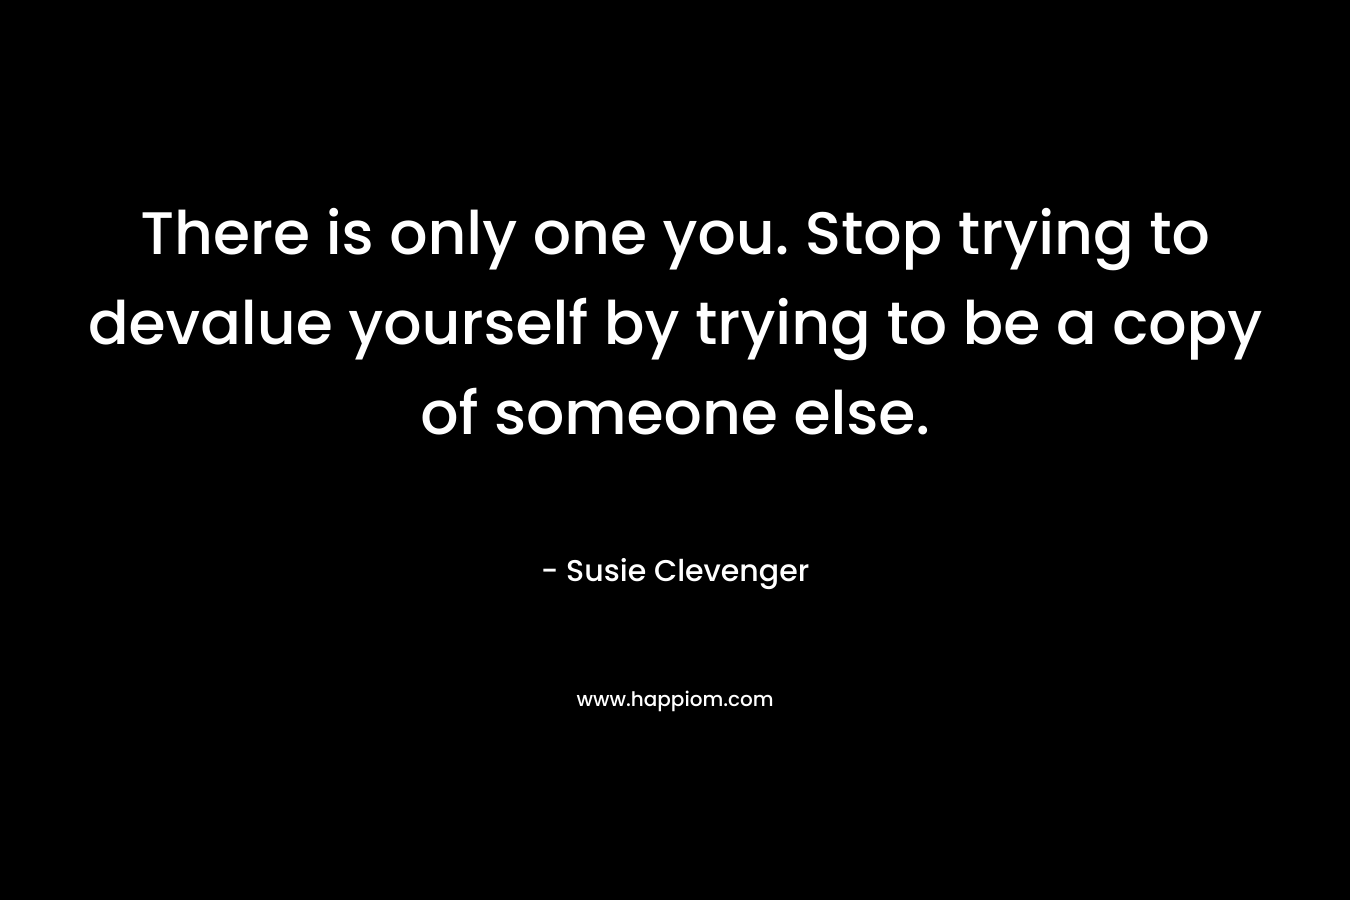 There is only one you. Stop trying to devalue yourself by trying to be a copy of someone else. – Susie Clevenger